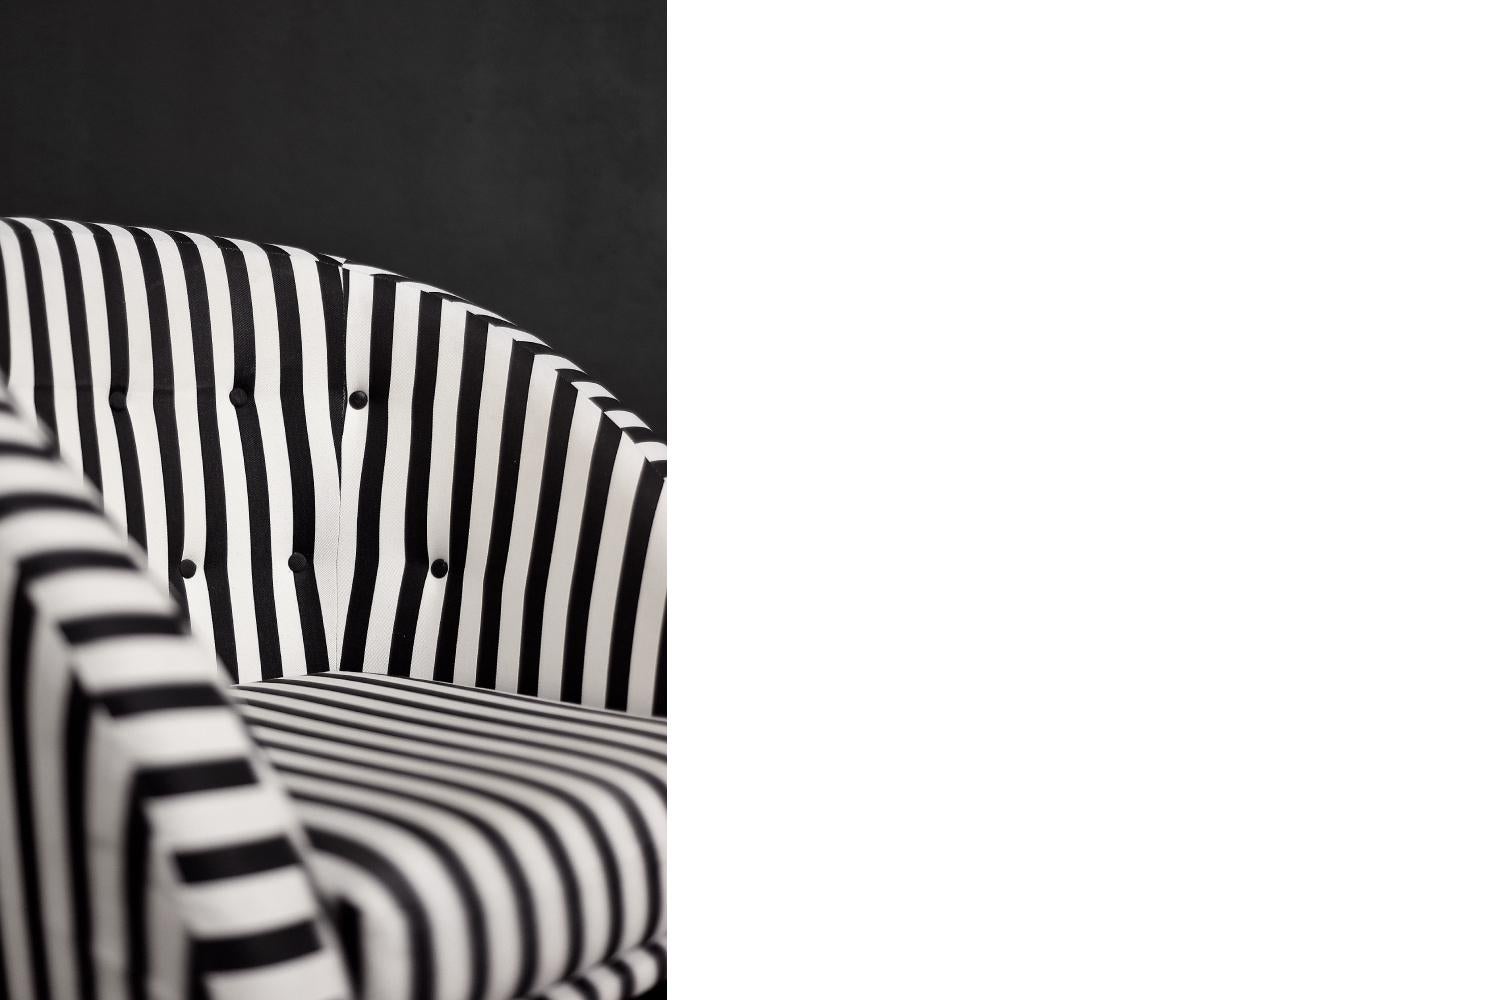 Pair of Mid-Century Scandinavian Modern Armchairs with Black&White Stripes, 1960 For Sale 7